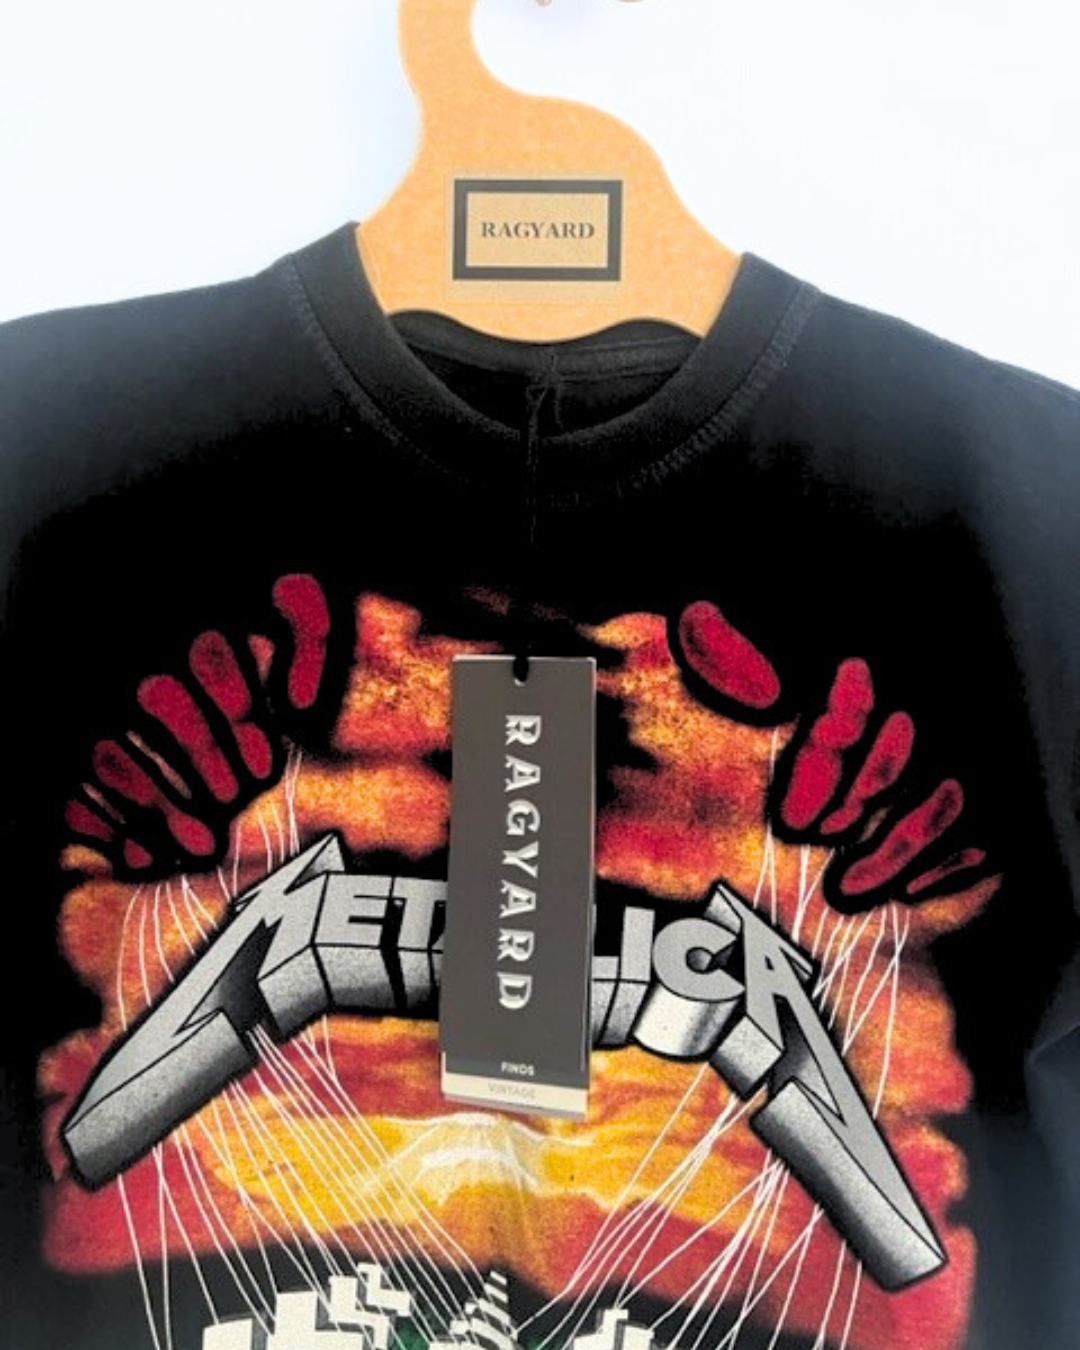 Vintage METALLICA Band T-shirt with Patchwork band tee back